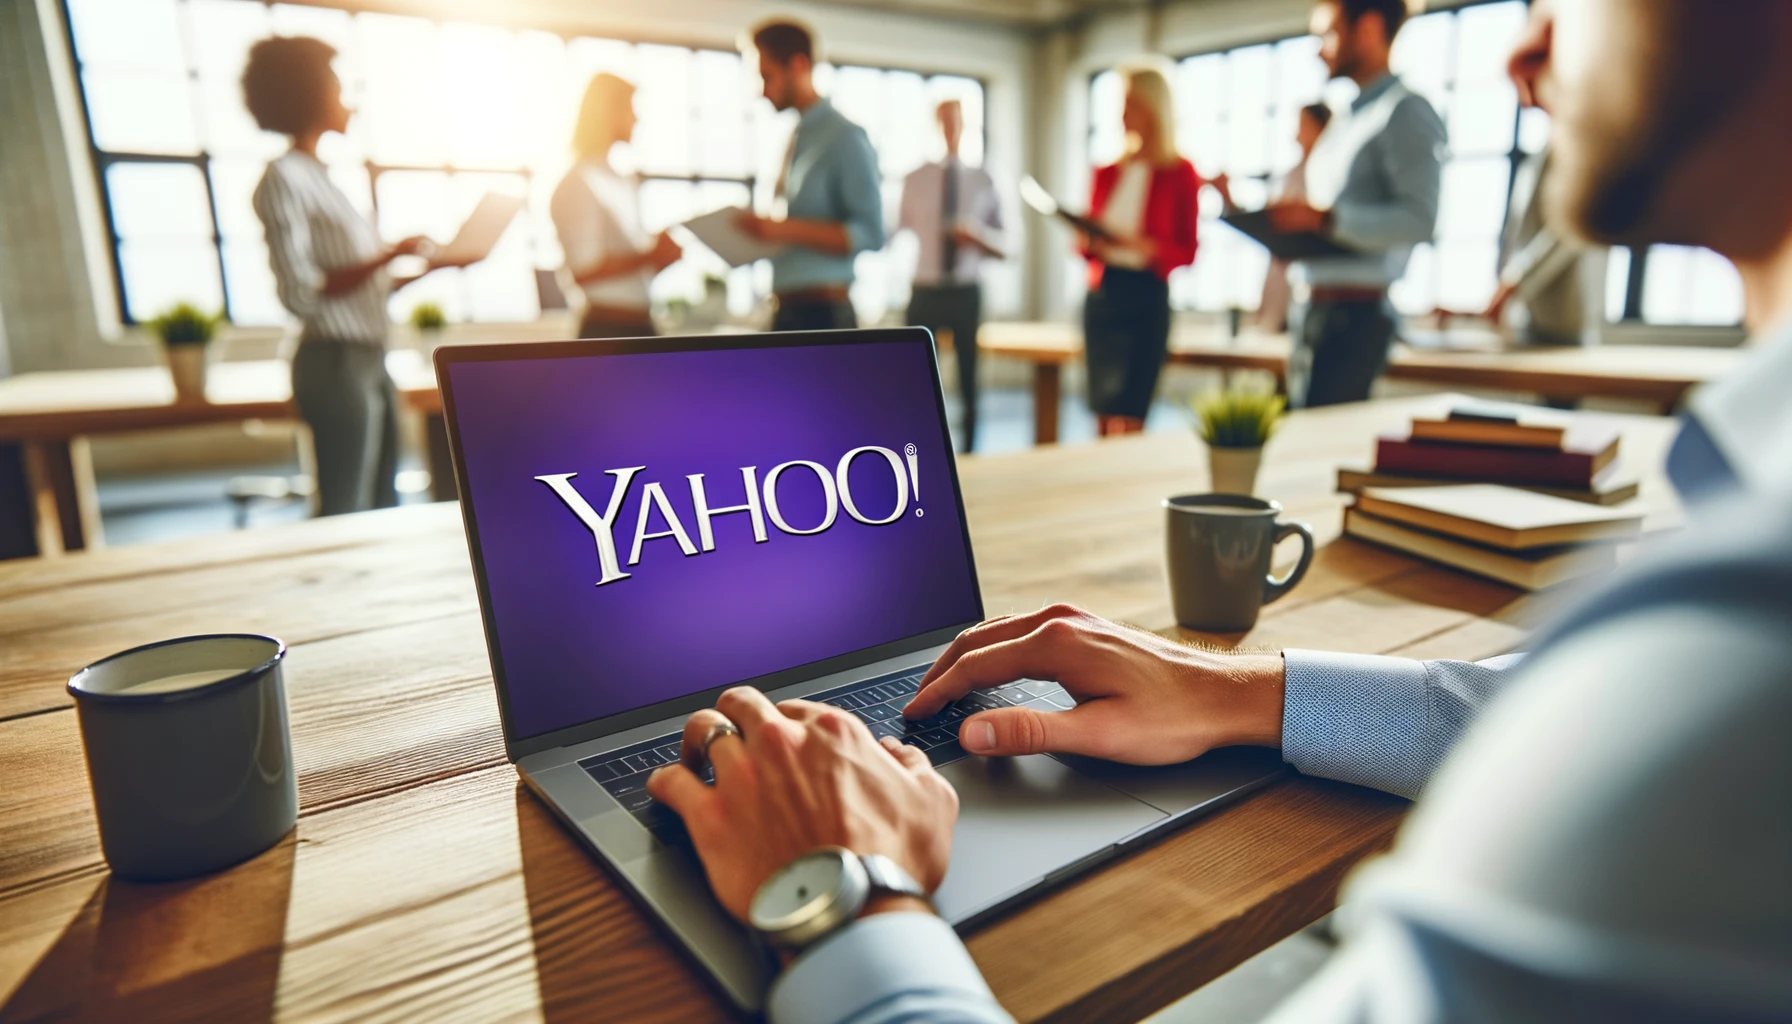 How to write Yahoo press release?